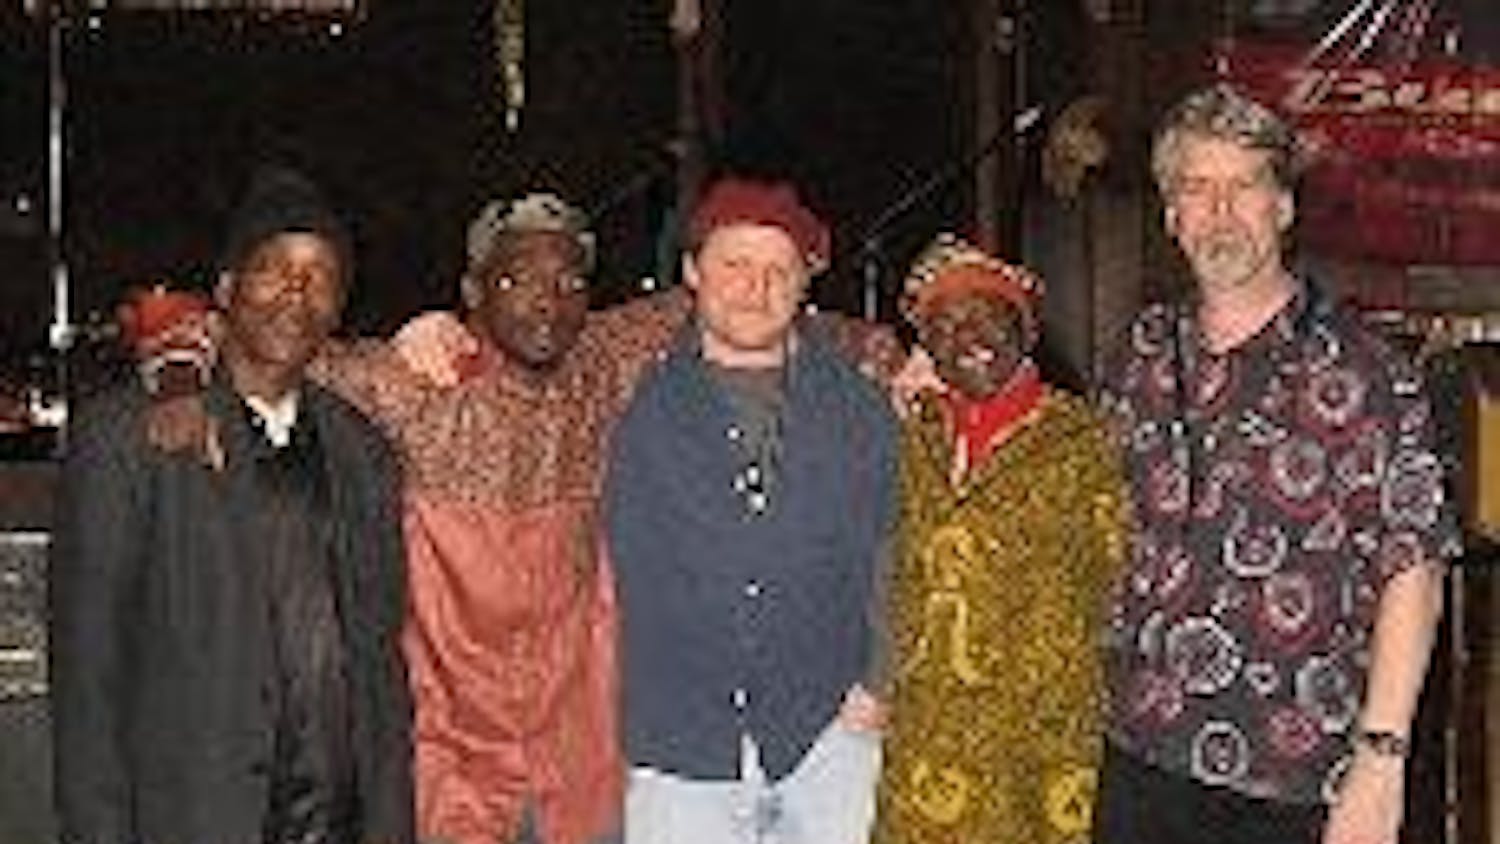 DEEP ROOTS - E	likeh's award-winning fusion of traditional West African music and 1970s funk will take the stage at DC9 Thursday night. This is the first in what the band hopes will be a series of concerts throughout the D.C. area to benefit African natio